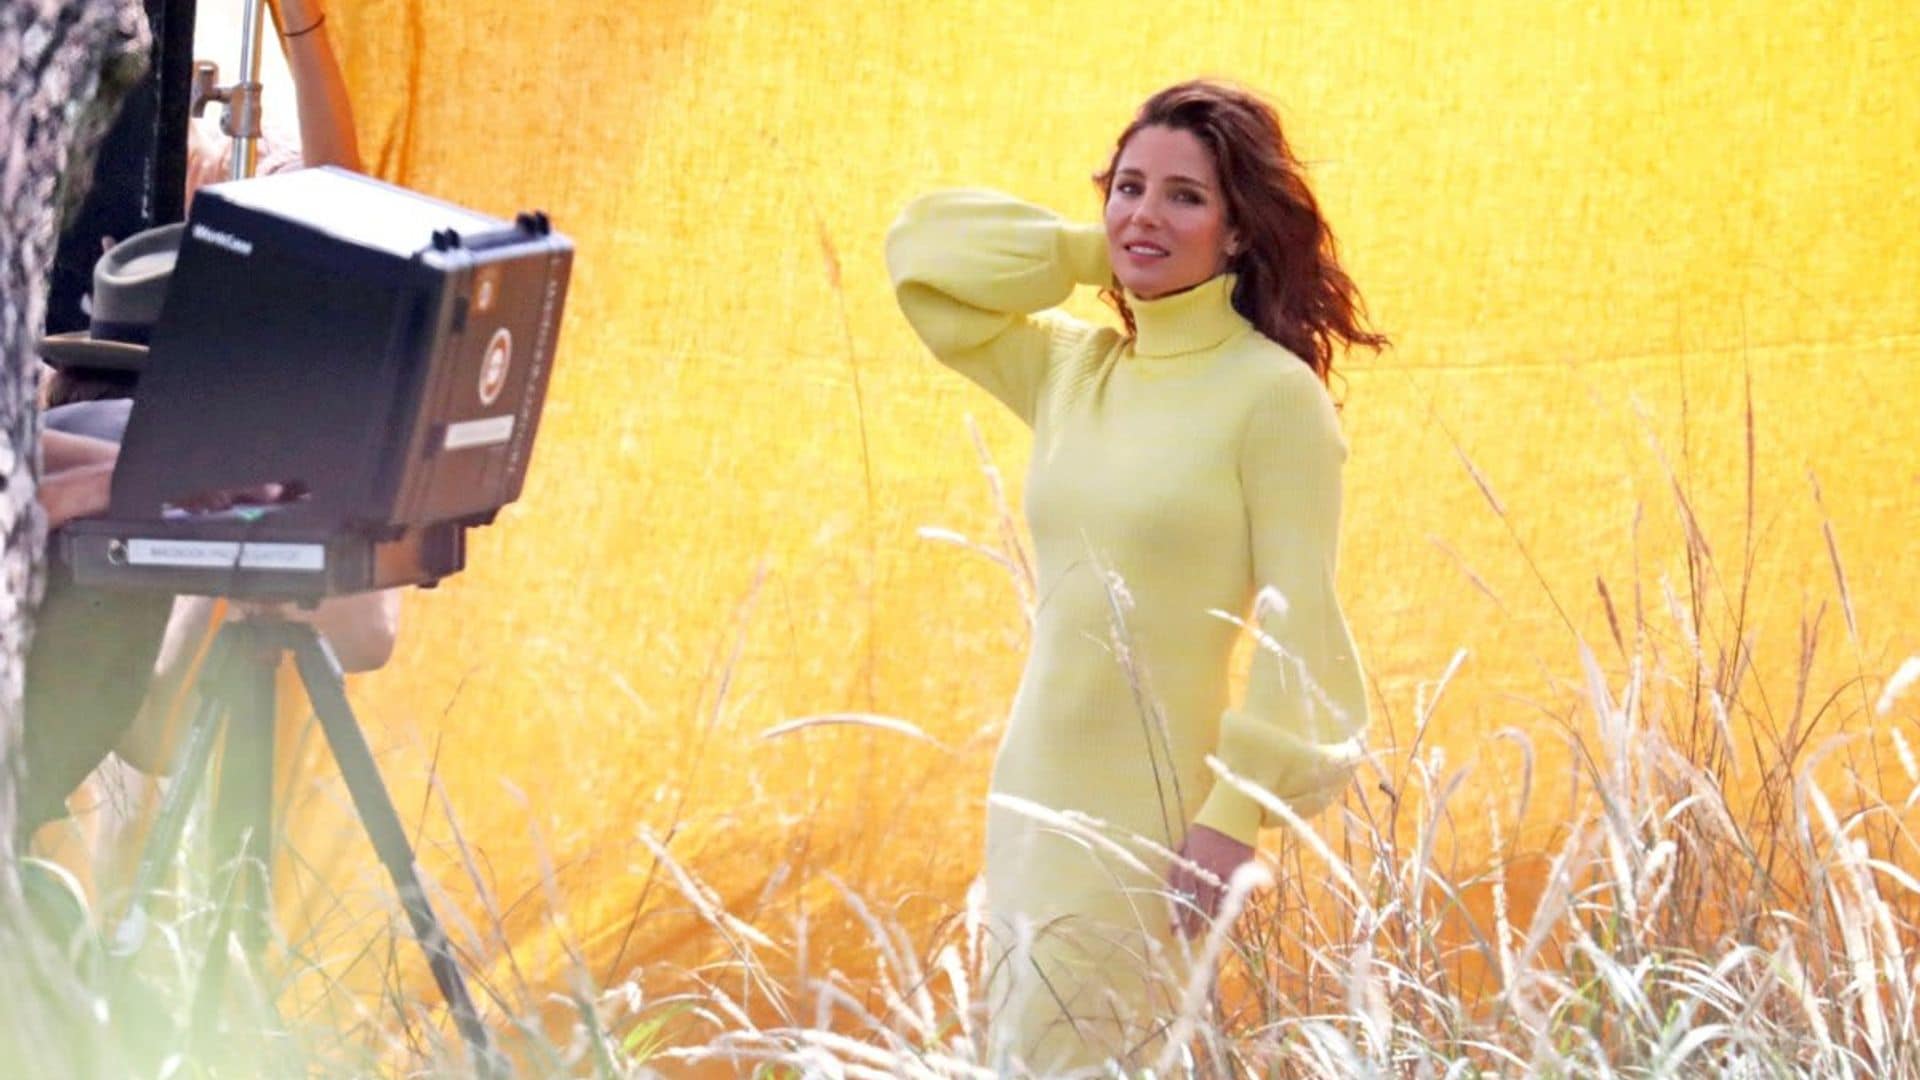 Elsa Pataky looked like a ray of sunshine in vibrant colors for a photoshoot in Sydney